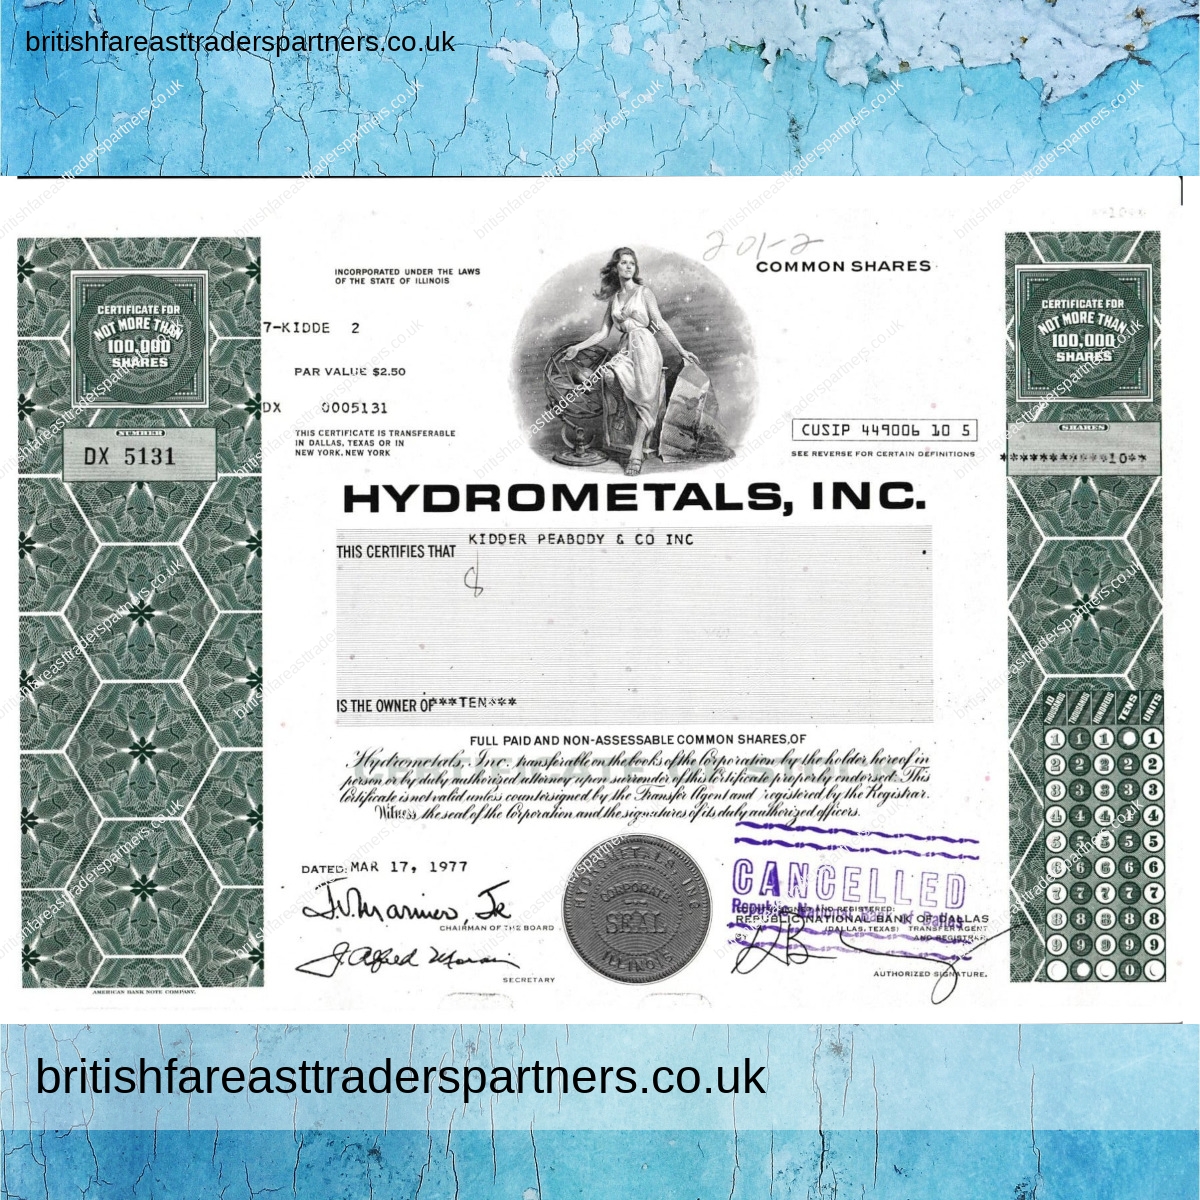 VINTAGE STOCK / SHARE CERTIFICATE “HYDROMETALS INC.” COLLECTABLE DOCUMENTS | SHARE CERTIFICATES | COMPANIES | WORLD | SCRIPOPHILY | BUSINESS | INVESTMENTS